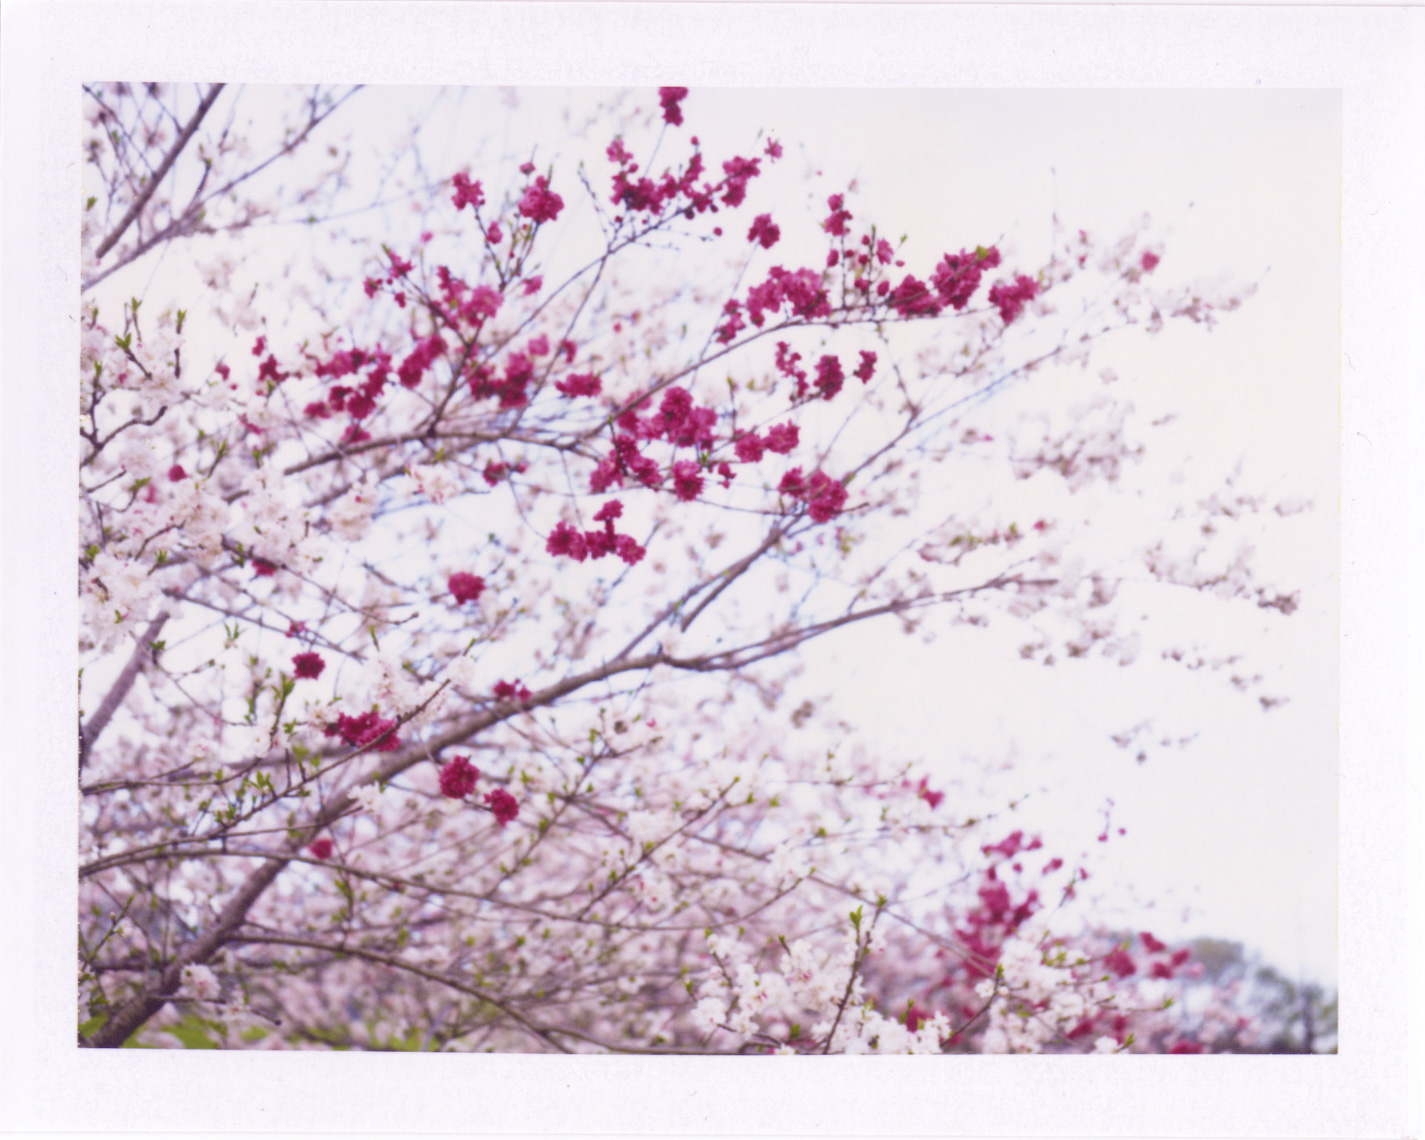 Misty and dreamy blossoms | Polaroid Photographers